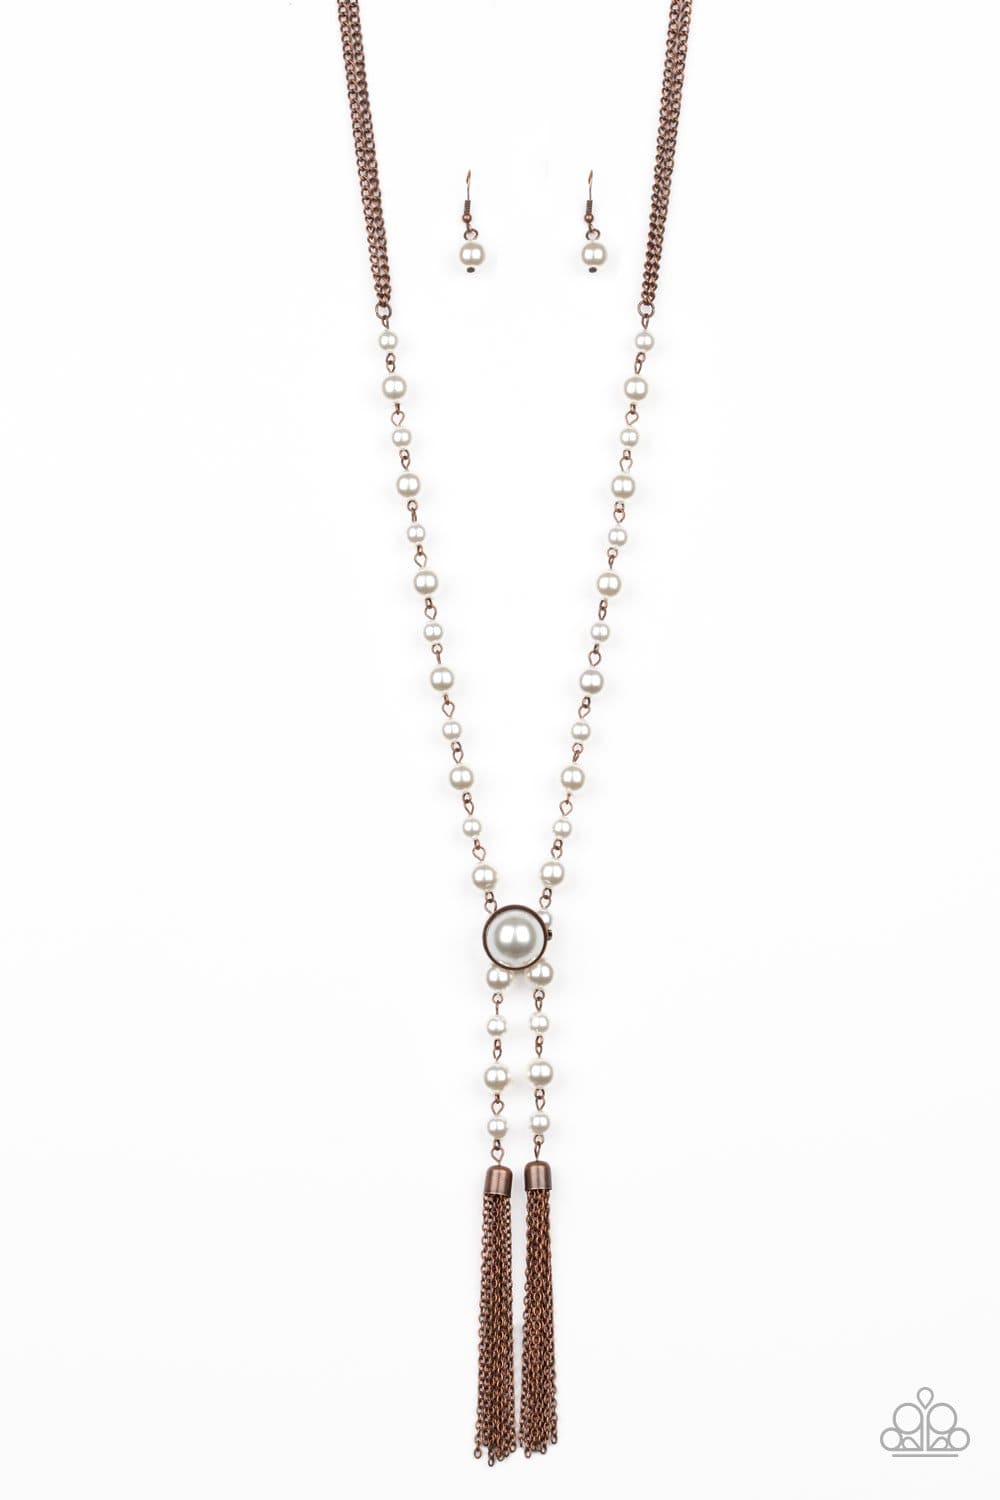 Paparazzi: Vintage Diva - Copper Pearl Tassel Necklace - Jewels N’ Thingz Boutique